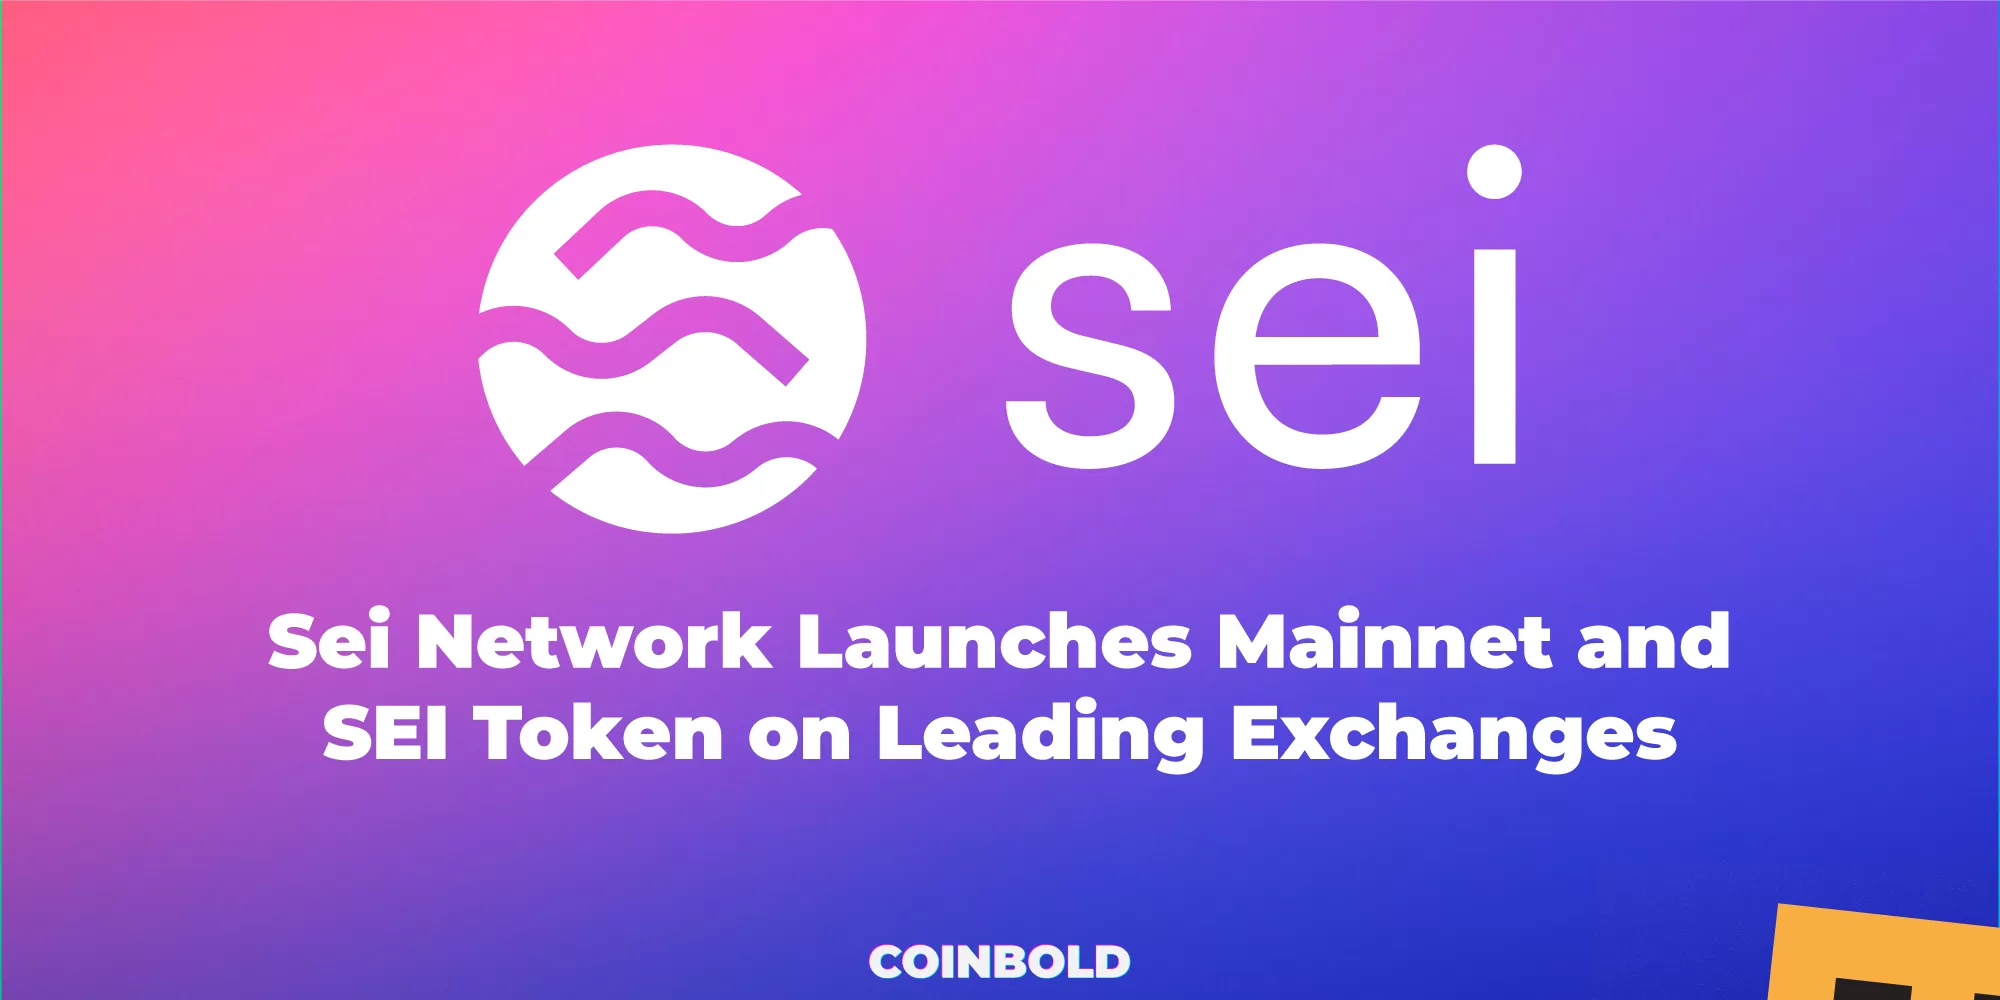 Sei Network Launches Mainnet and SEI Token on Leading Exchanges